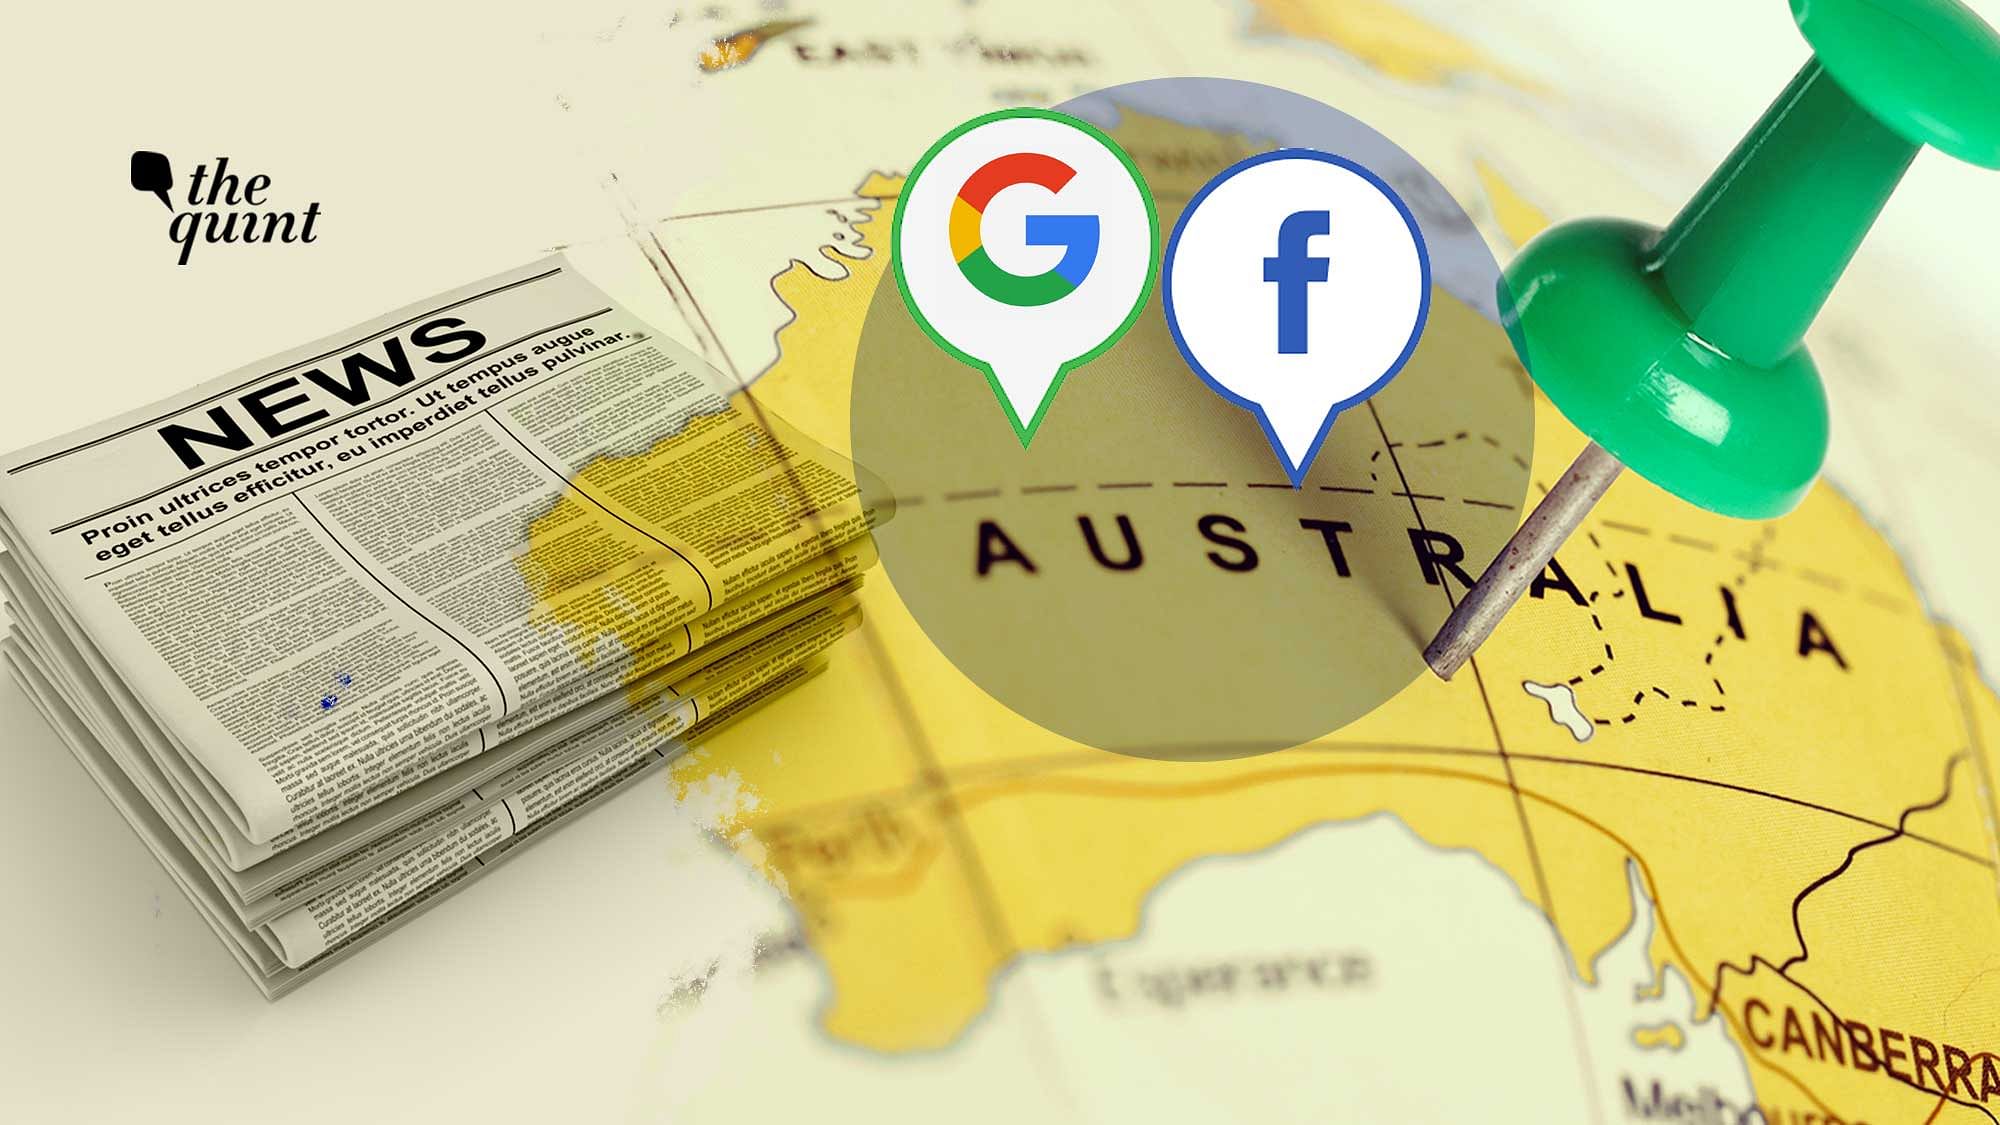 With some final tweaks expected to the draft legislation, Facebook on Tuesday announced it would restore news for Australian users and strike up commercial agreements with local publishers. Image used for representation.